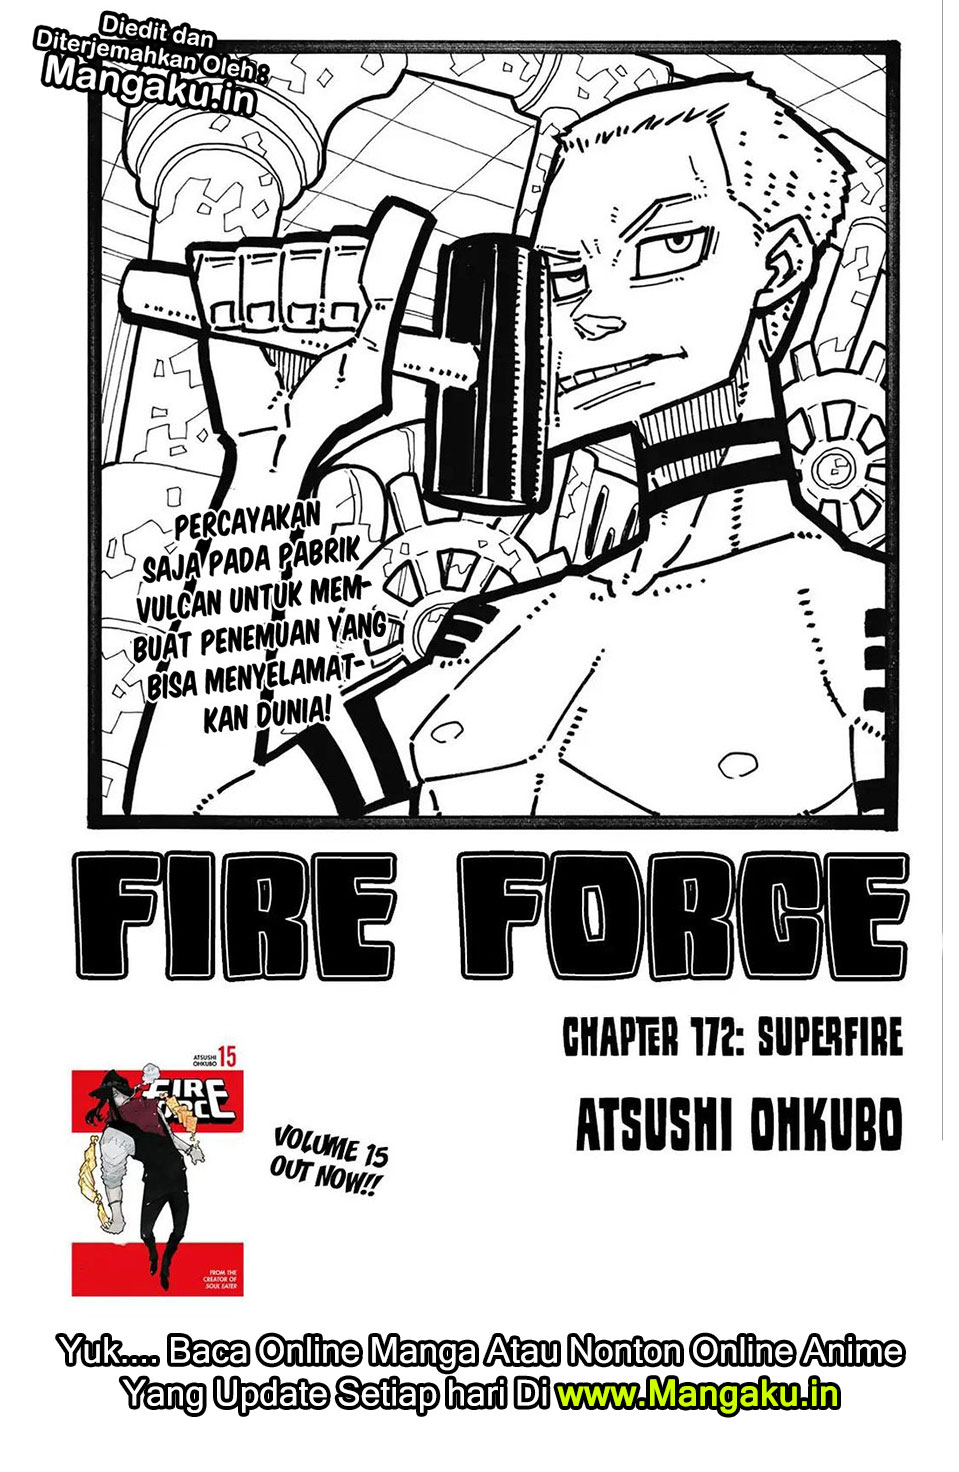 Fire Brigade of Flames Chapter 172